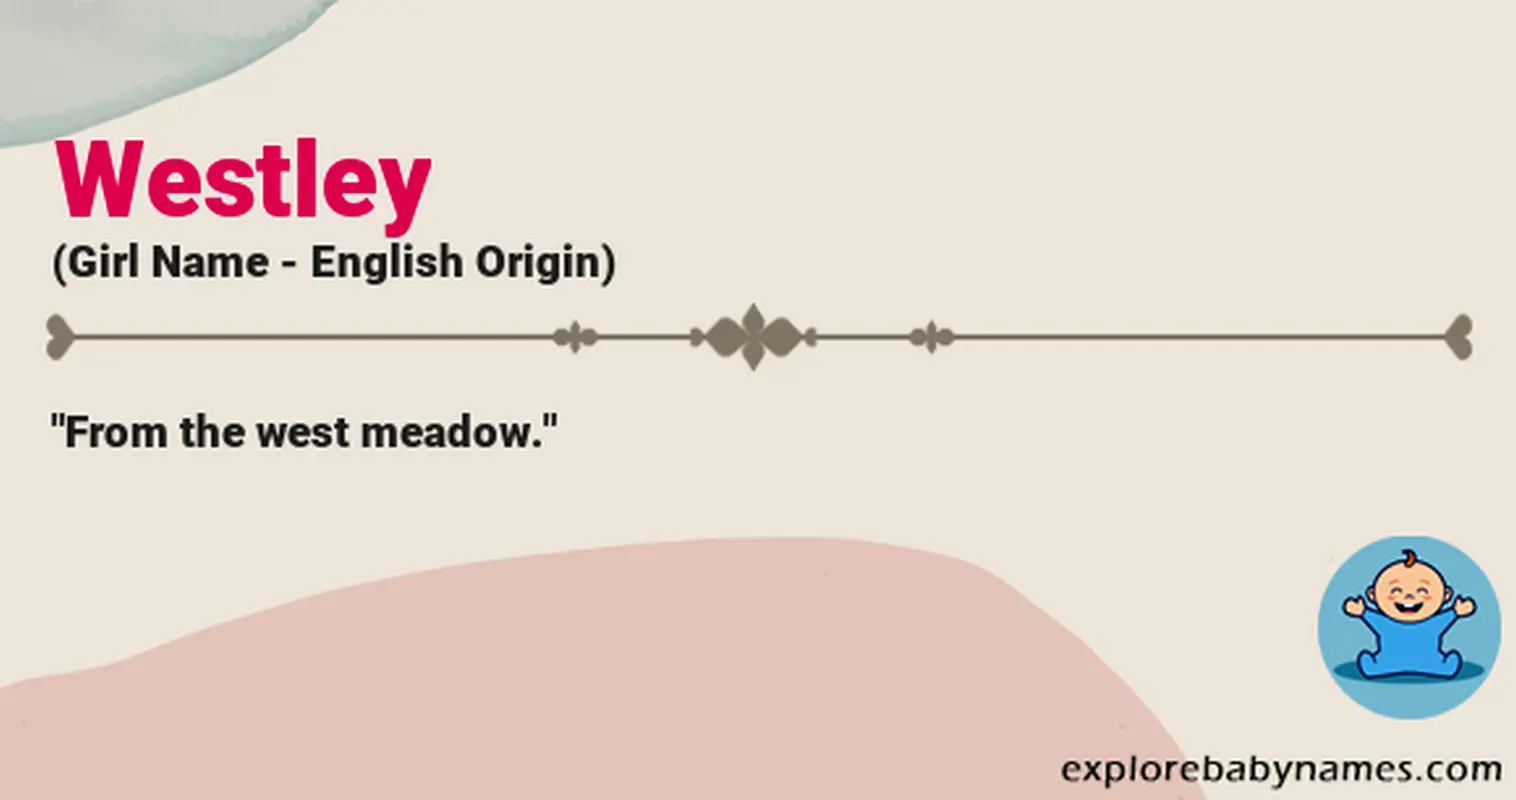 Meaning of Westley